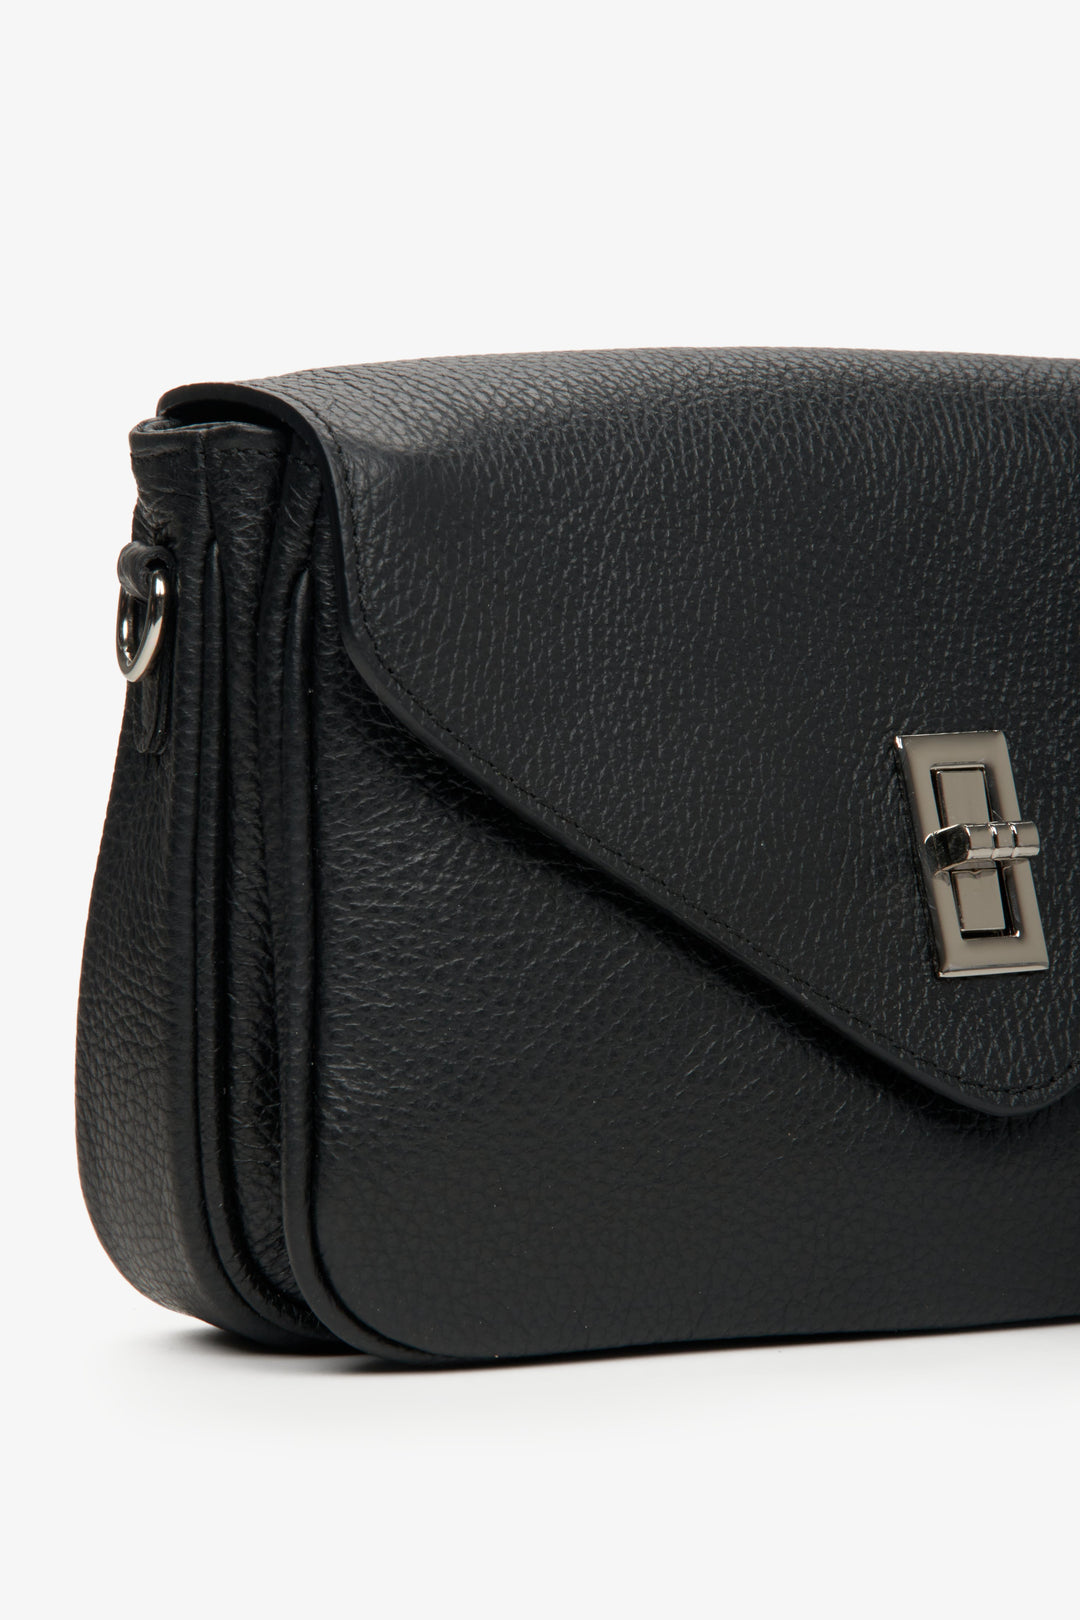 Black small ESTRO women's shoulder bag made of Italian natural leather.